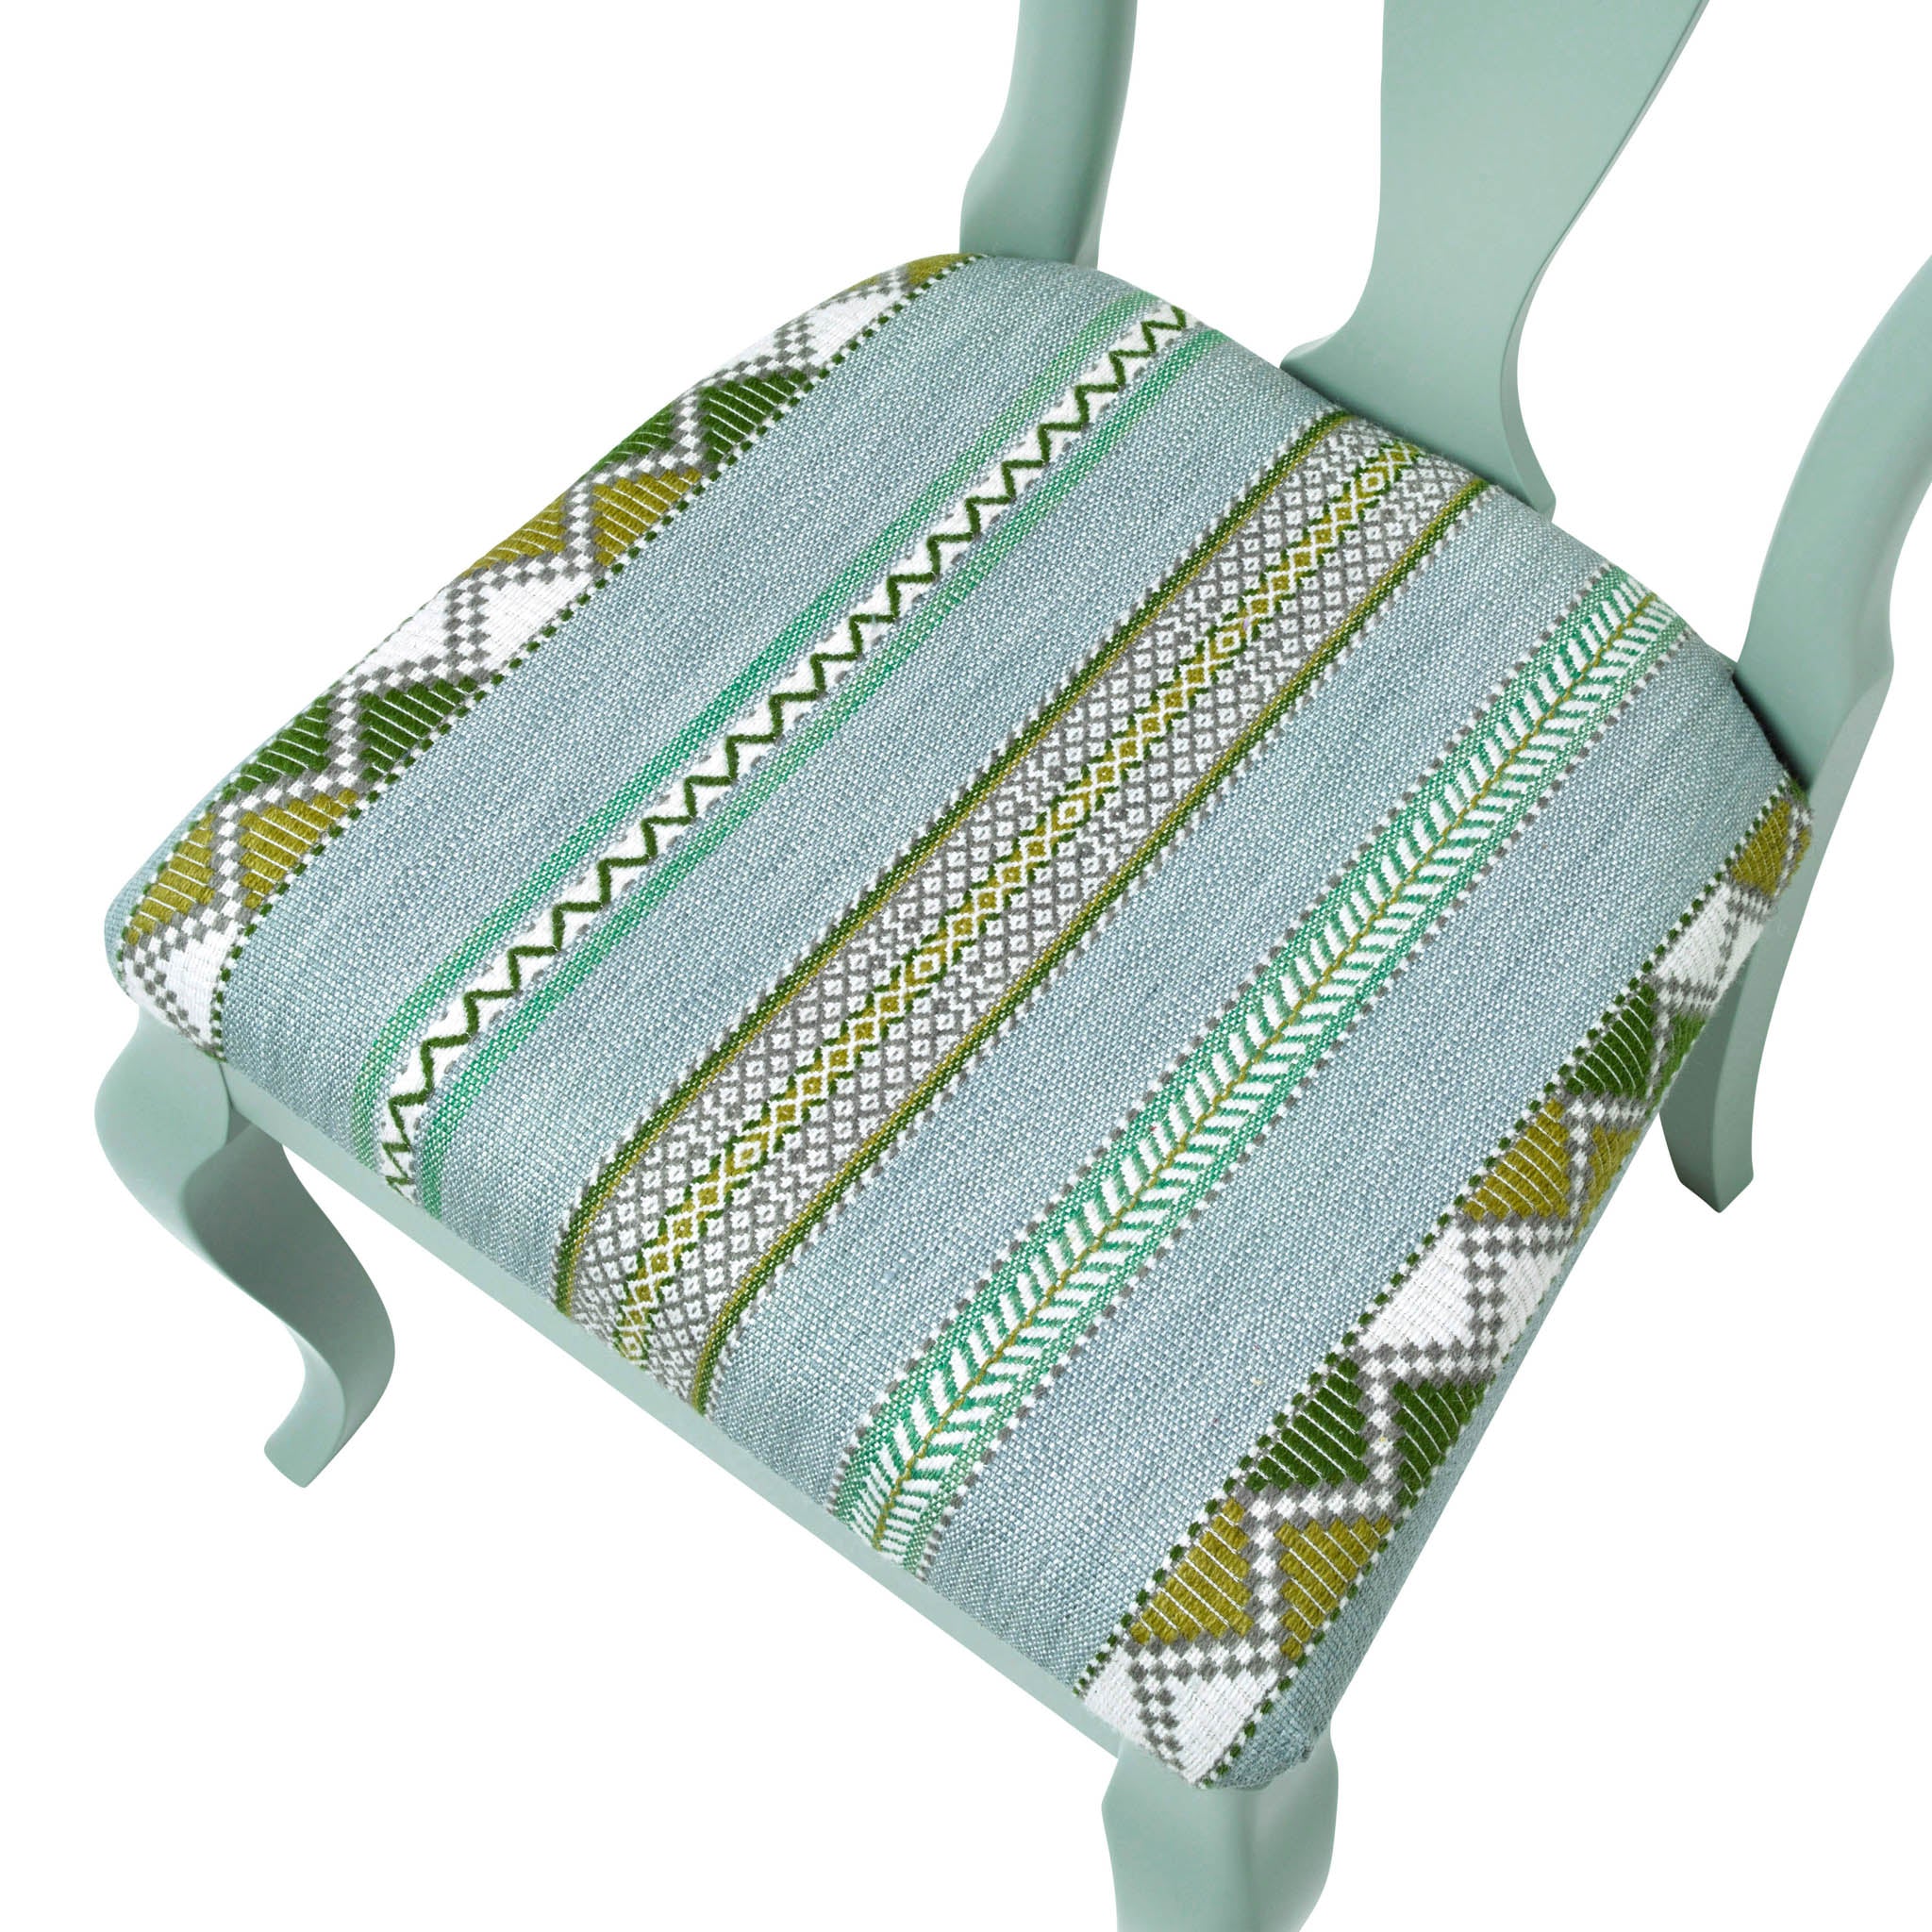 Marco Side Chair Upholstered in Woven Ribbon by Kit Kemp